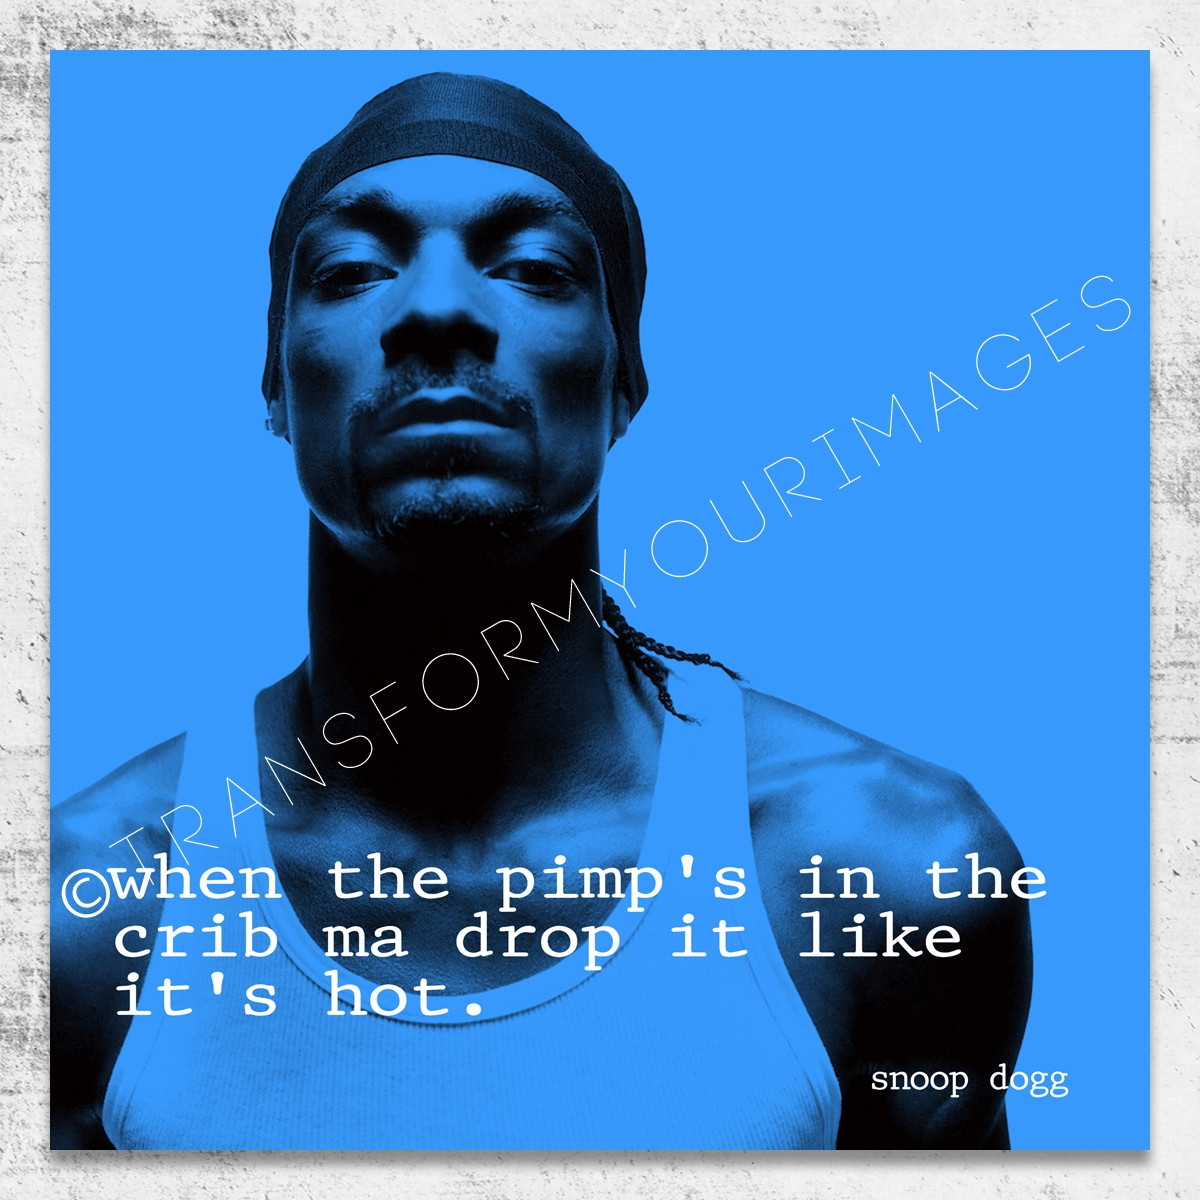 Funny Snoop Dogg Quotes
 snoop dogg quote square wall art